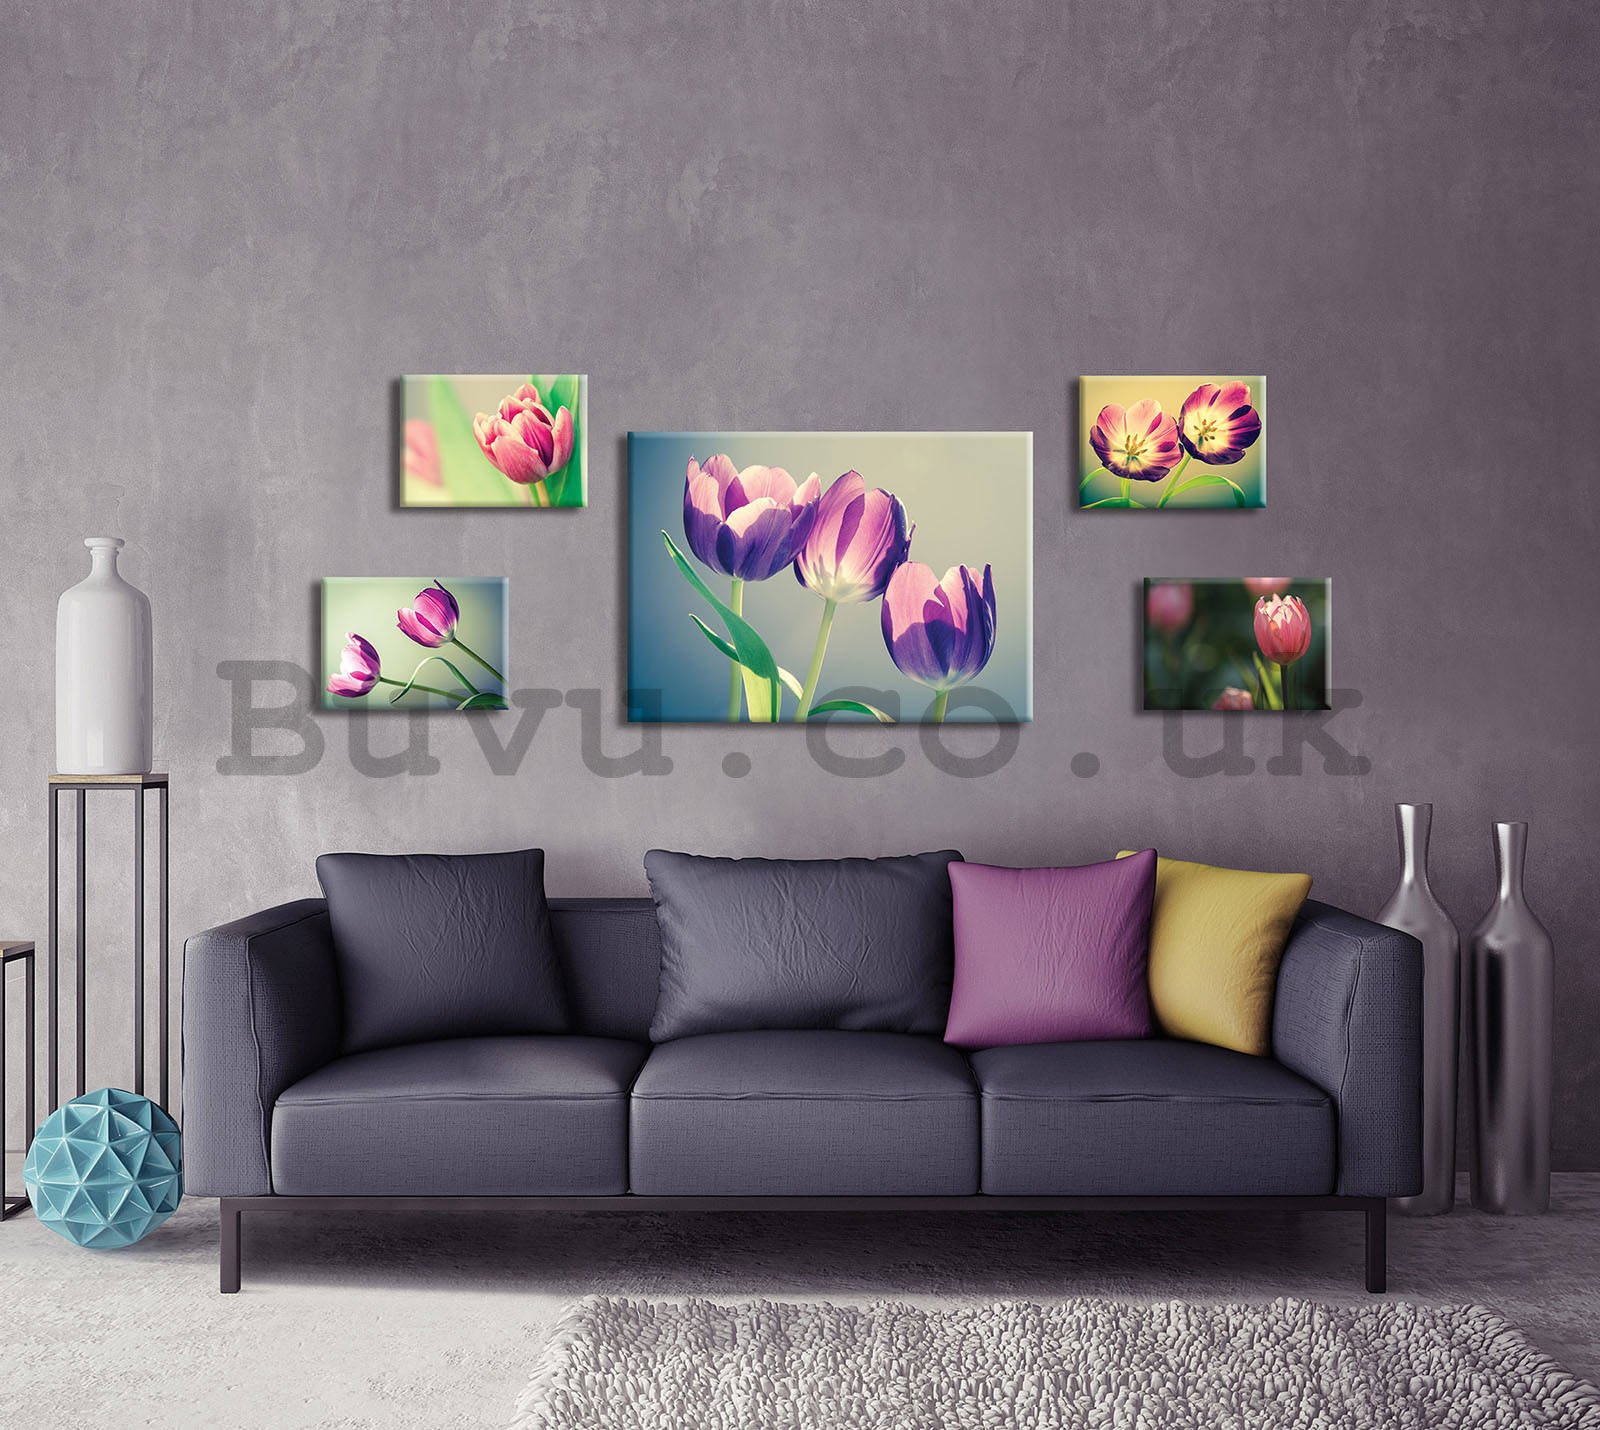 Painting on canvas: Tulips (2)  - set 1pc 70x50 cm and 4pc 32,4x22,8 cm